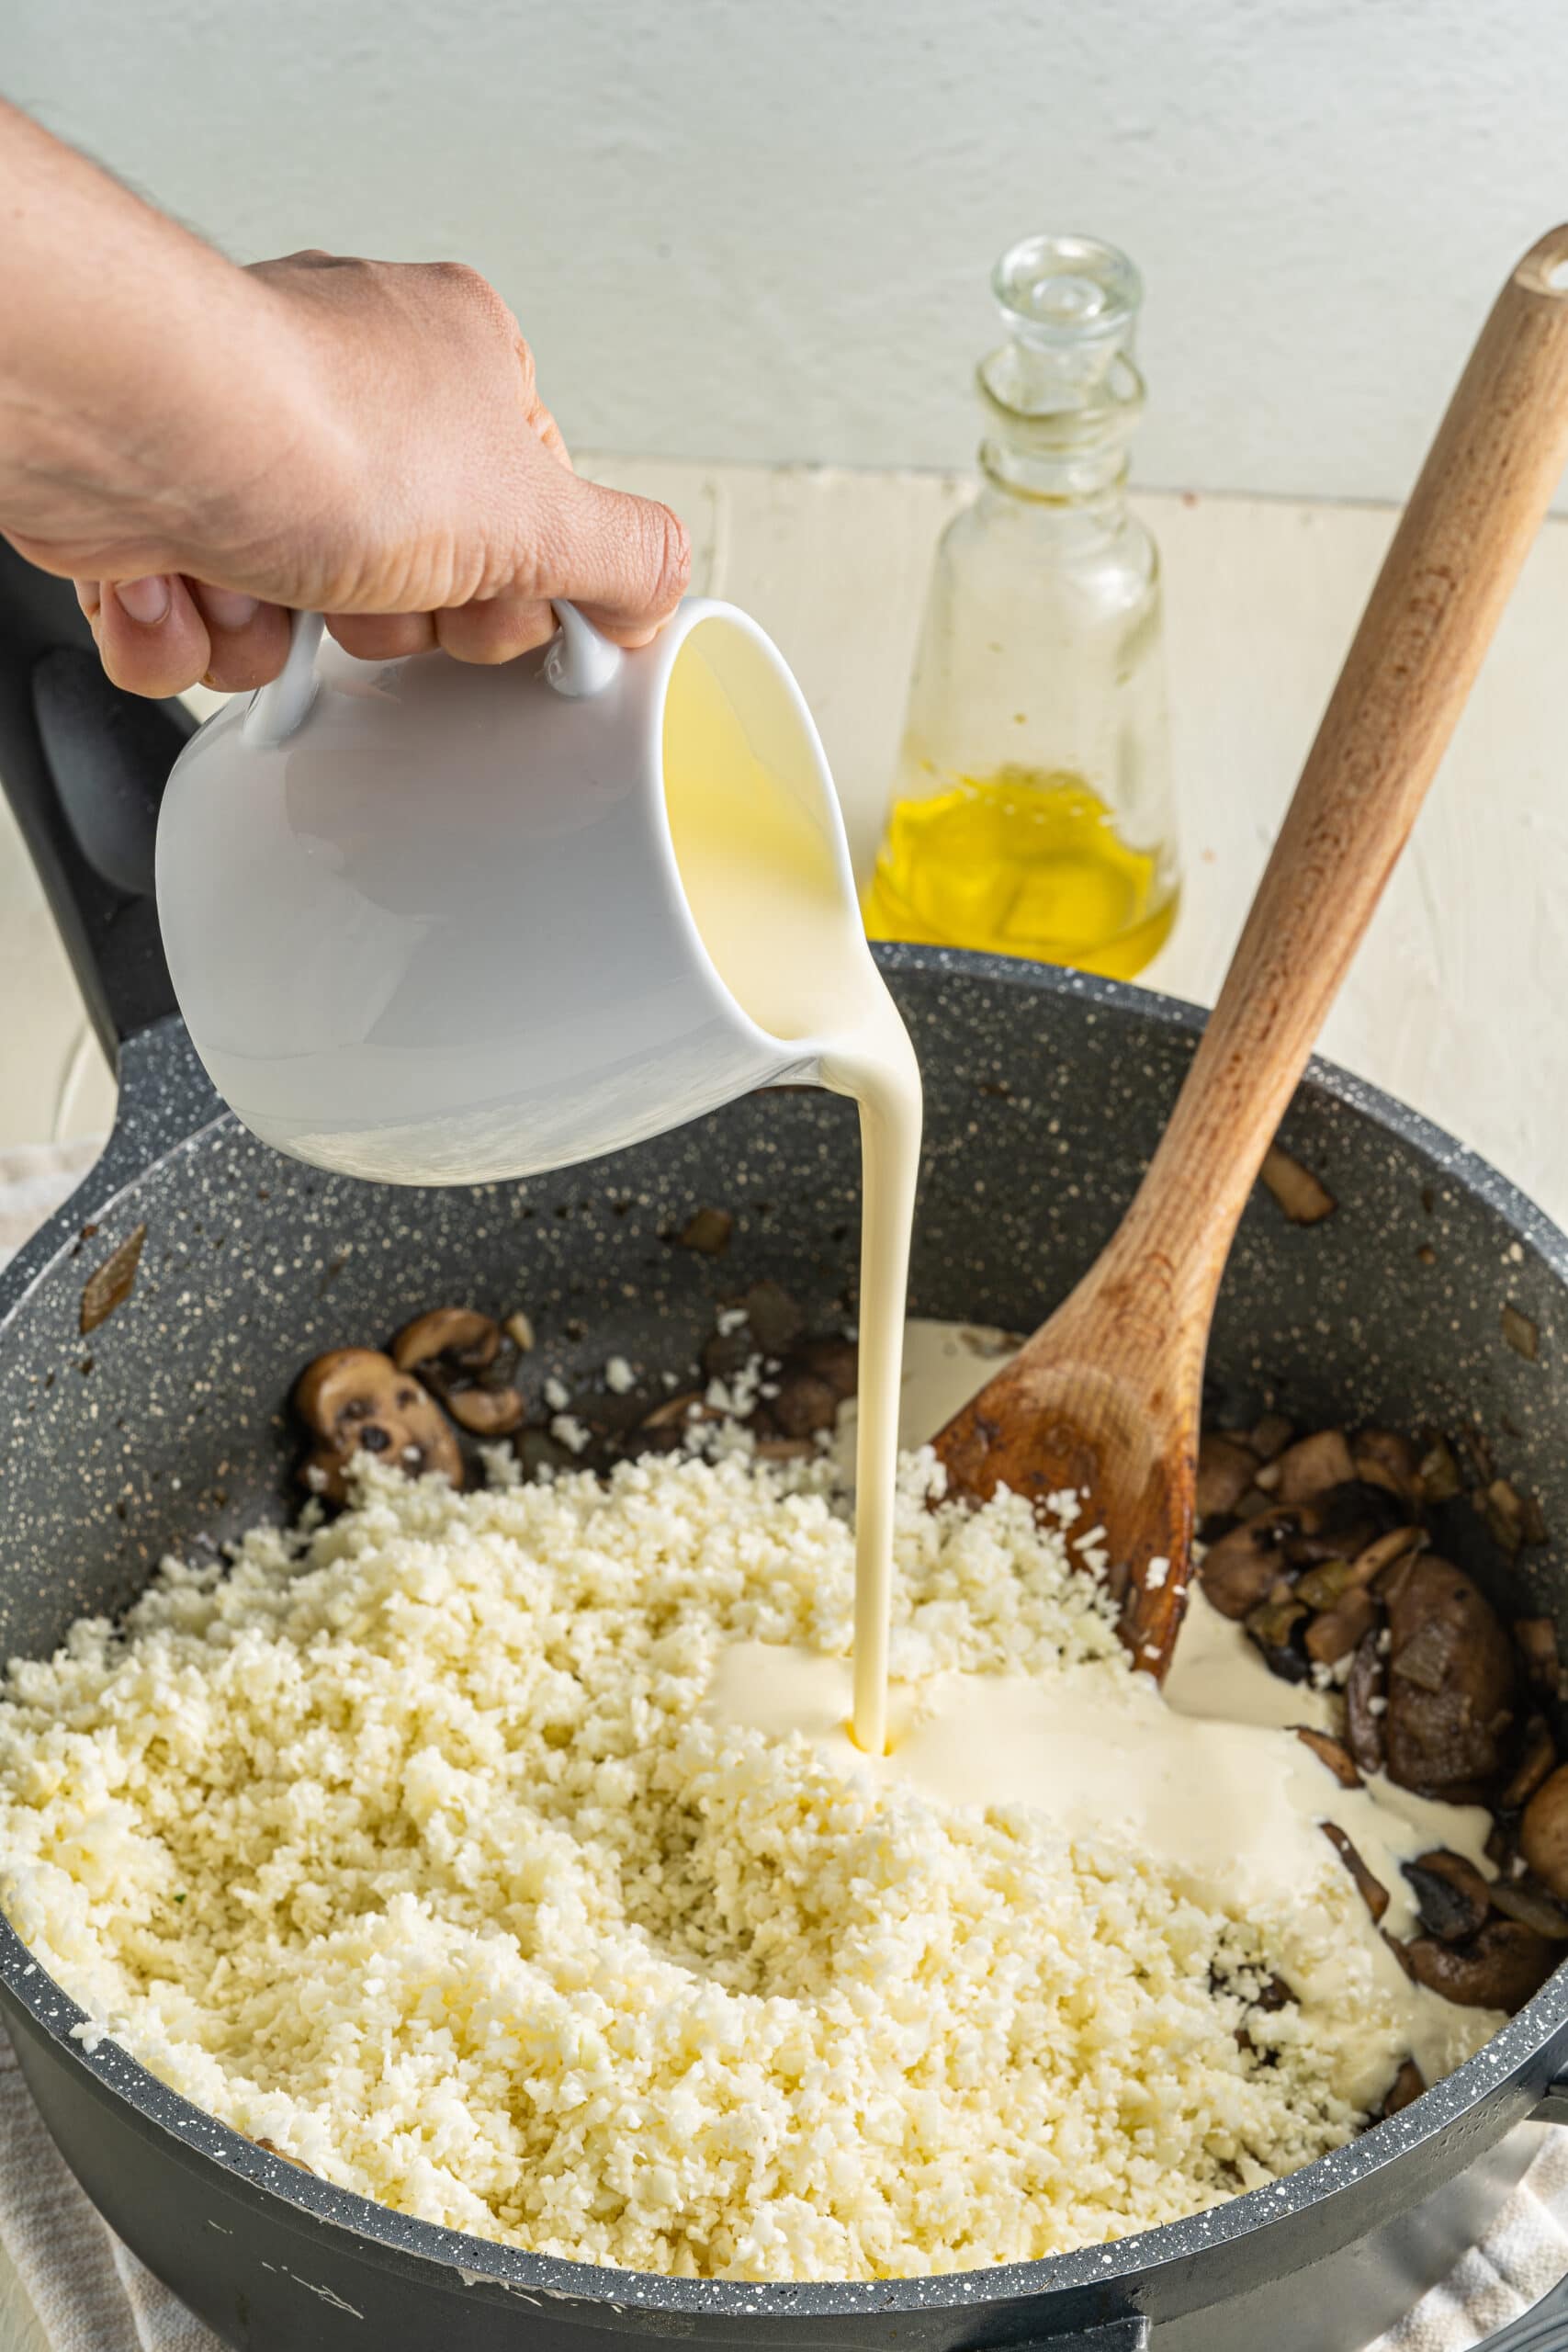 Picture of cream pouring into the pan with mushrooms and cauliflower rice.